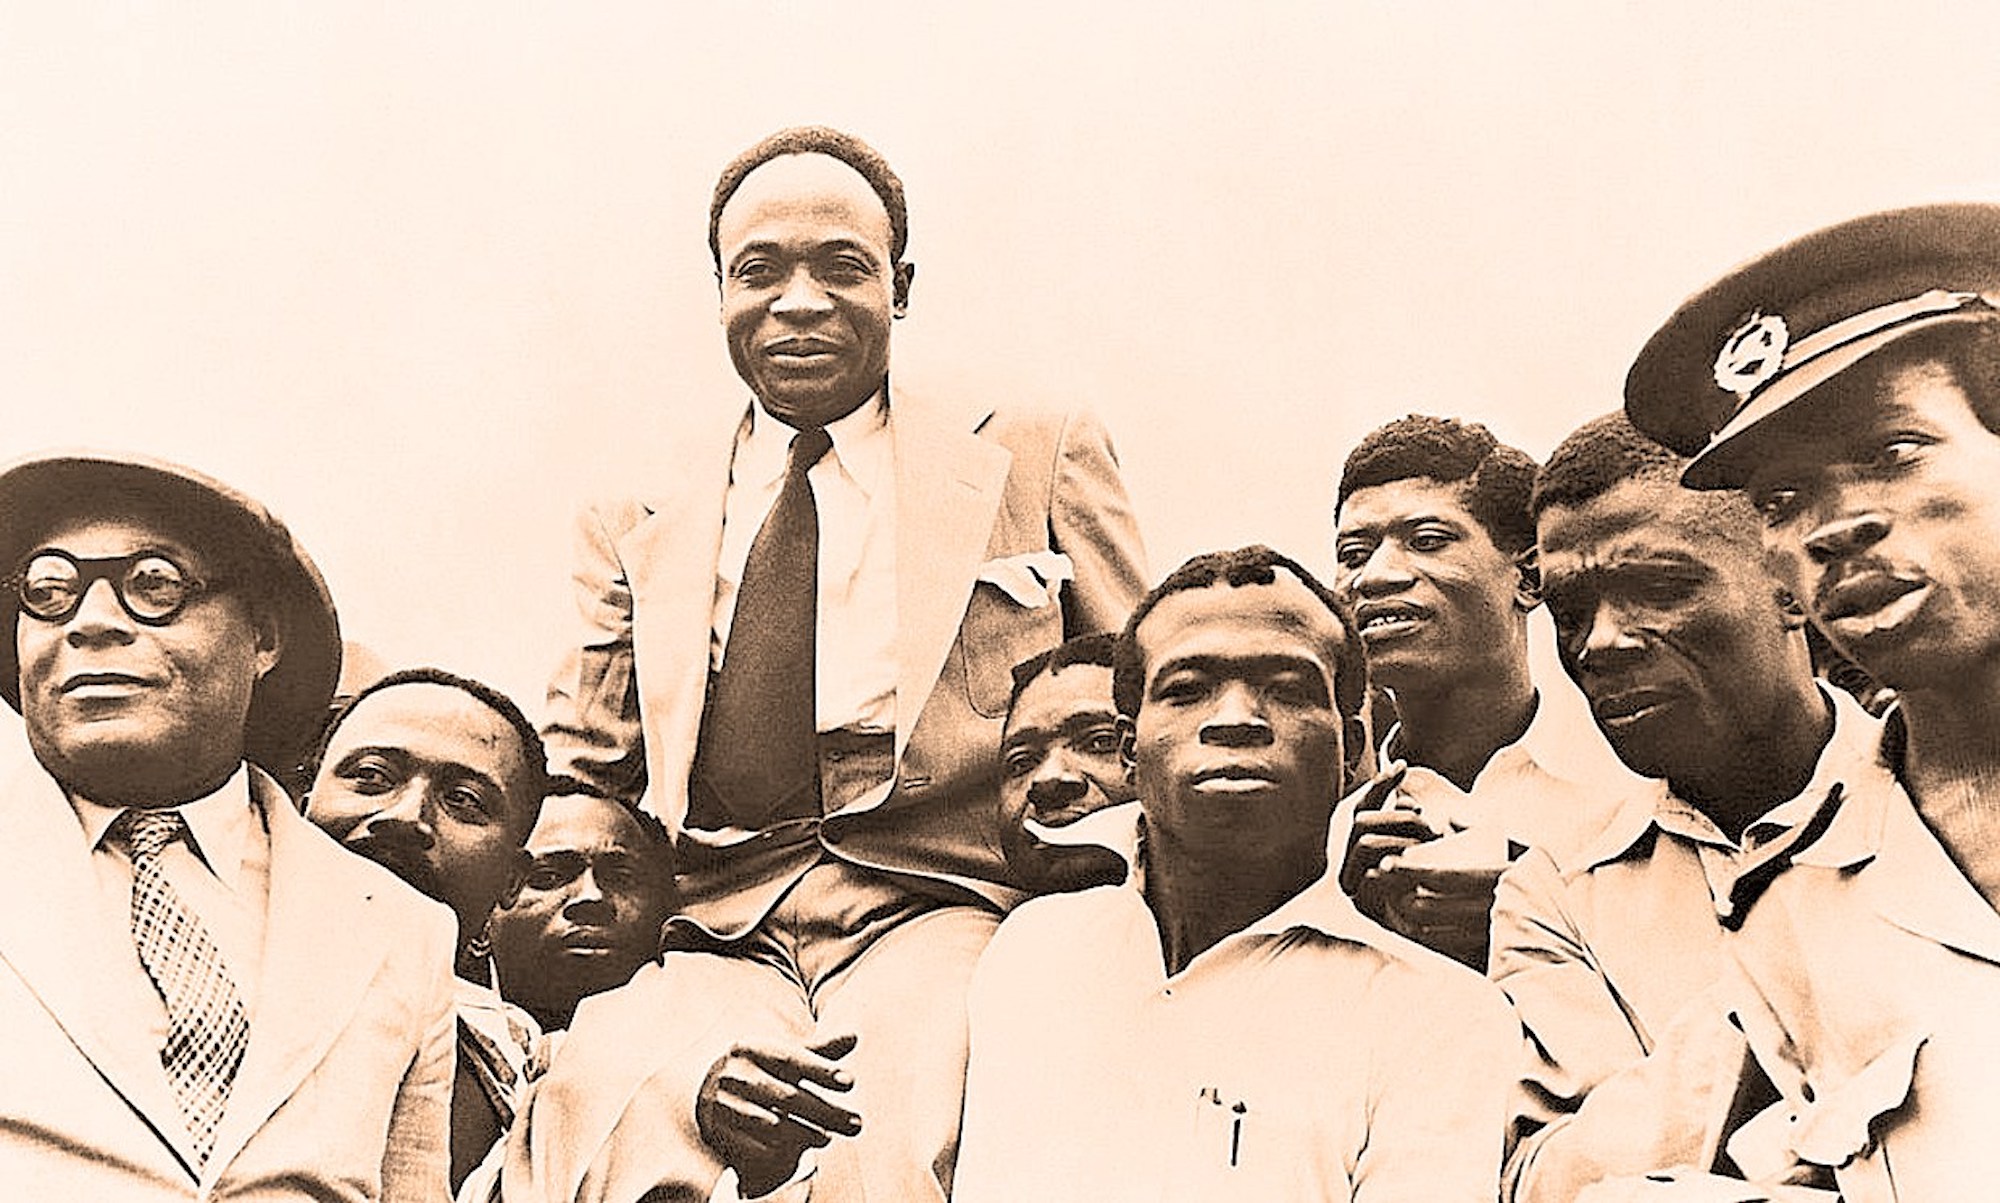 How Kwame Nkrumah used metaphor as a political weapon against colonialism | The Conversation